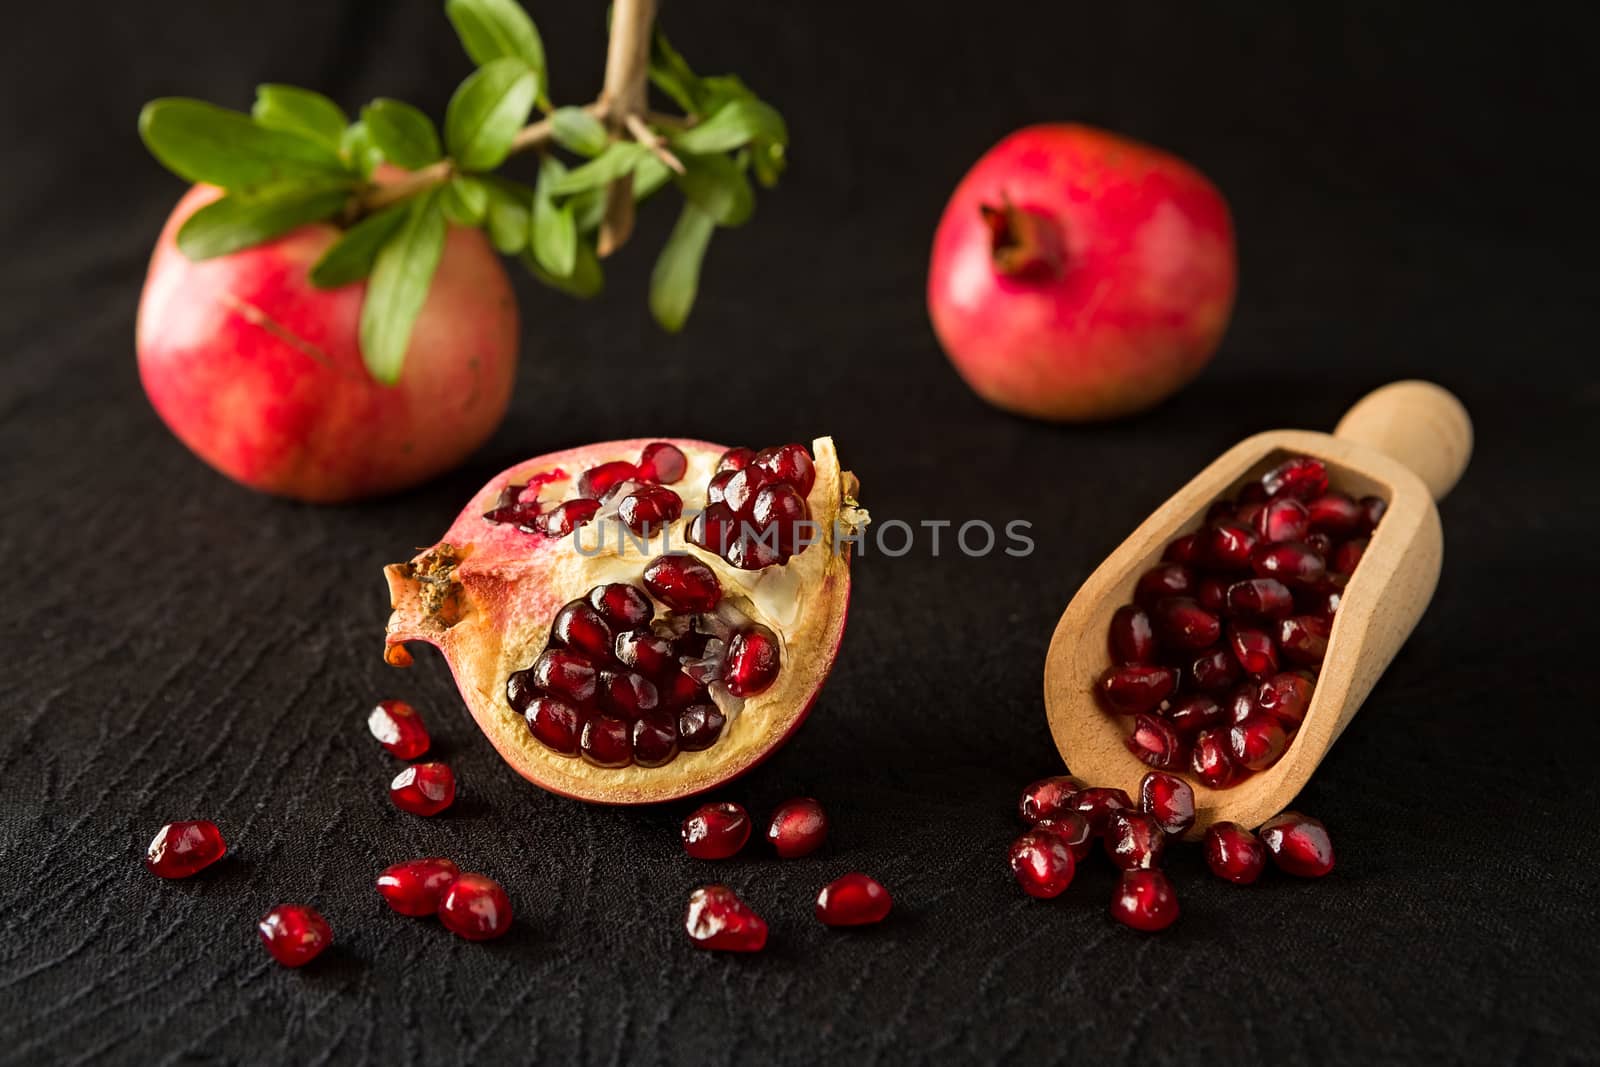 Ripe pomegranate fruits and bailer with seeds inside by LuigiMorbidelli